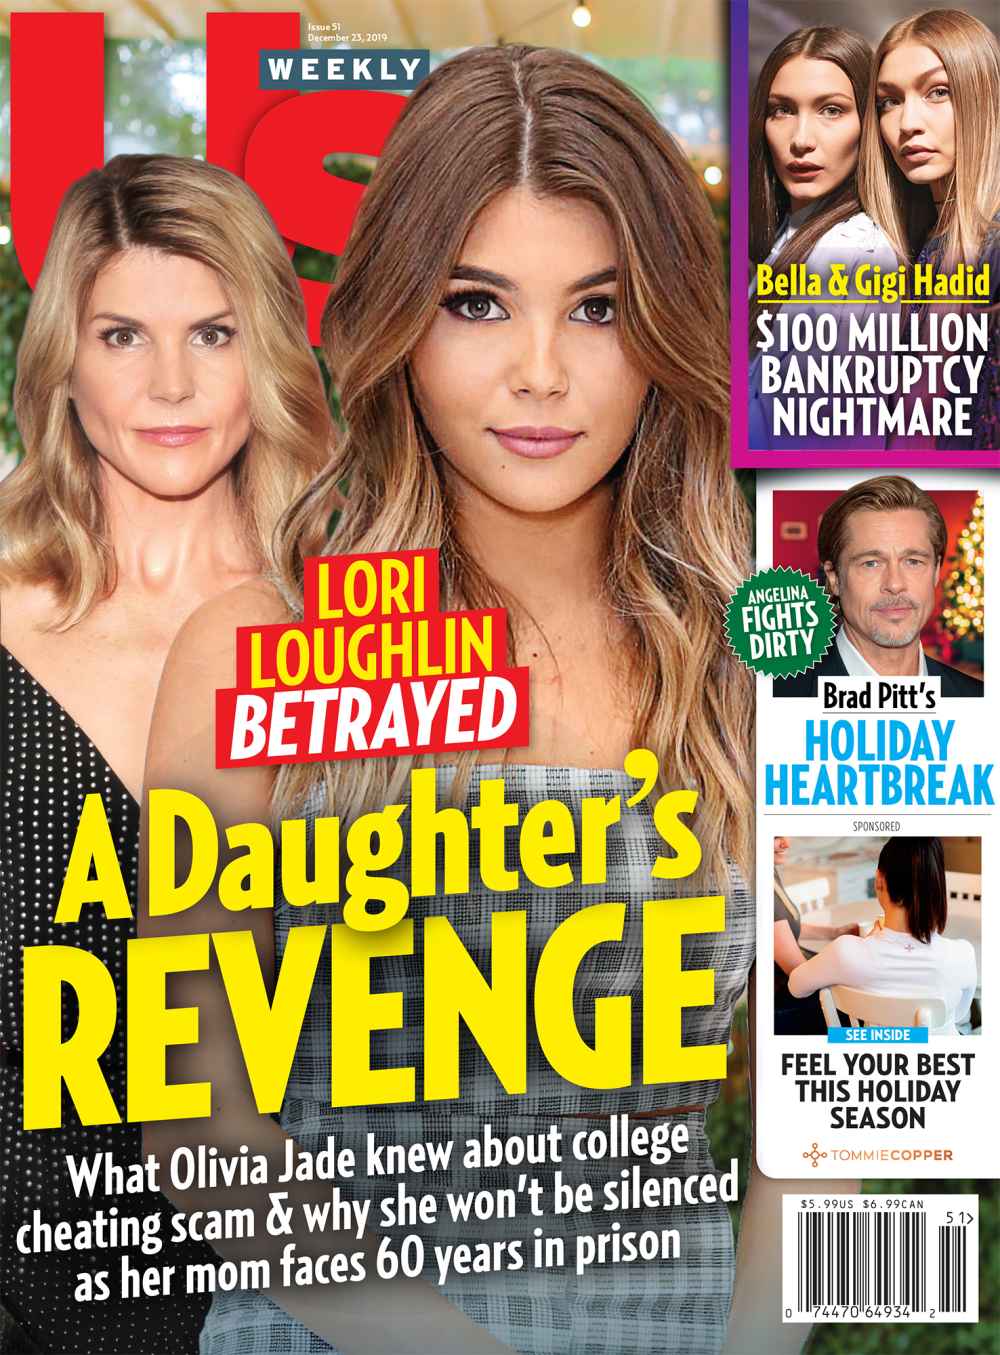 US Weekly Cover 5119 What Gigi Bella Hadid Think of Their Dad Bankruptcy Nightmare